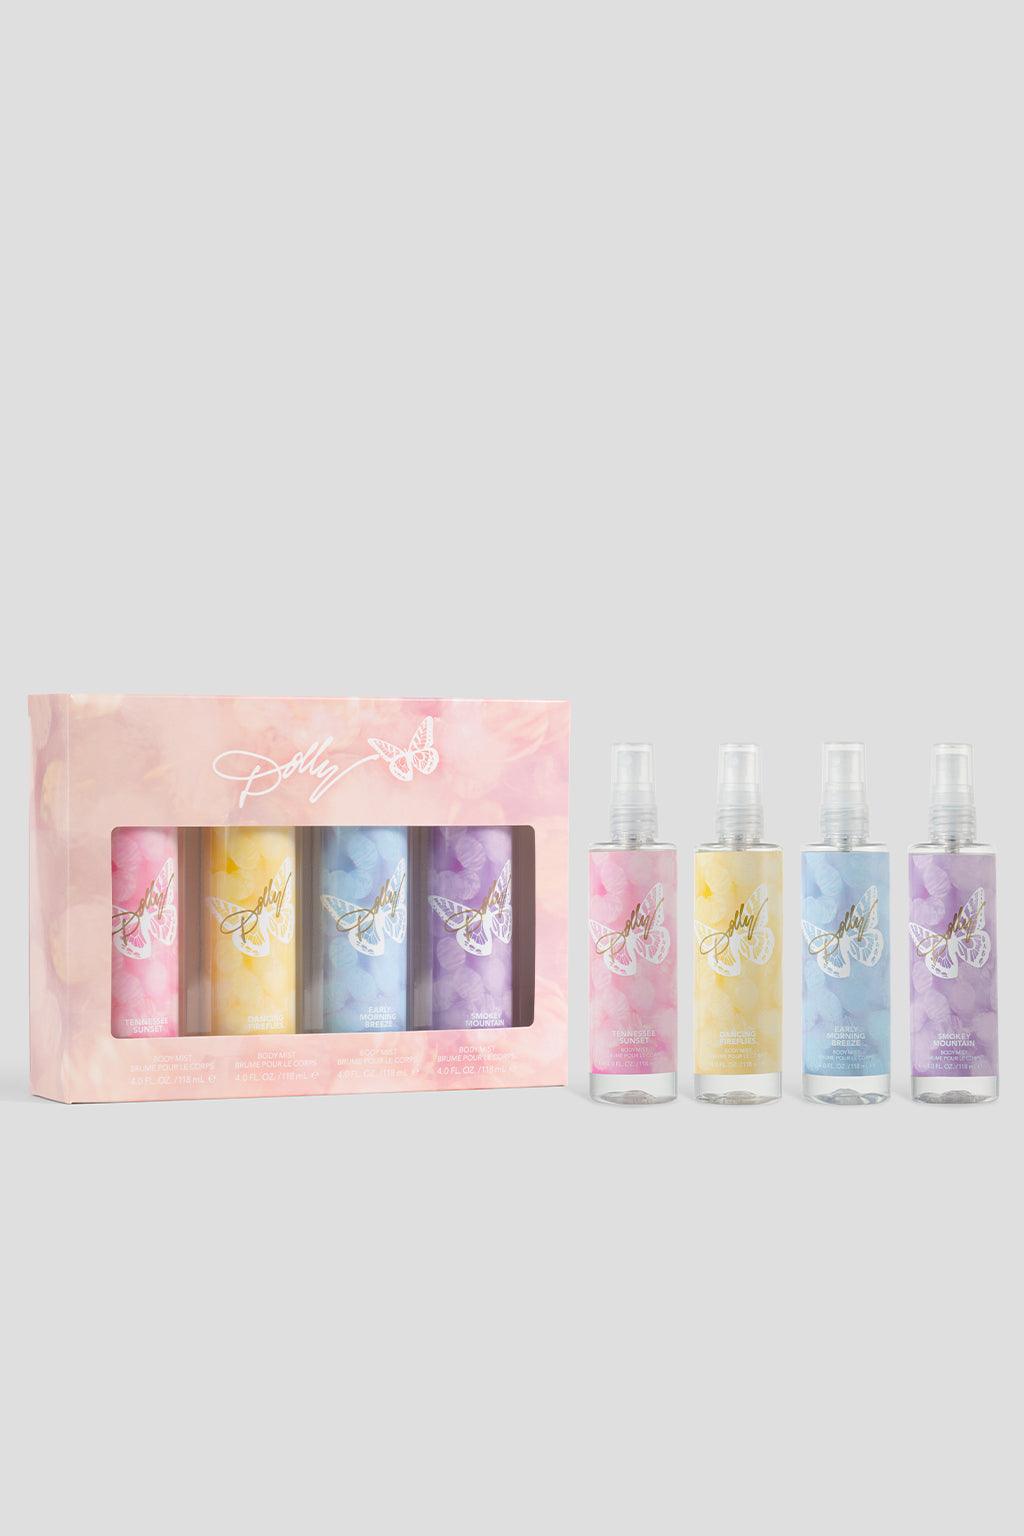 DOLLY: FROM THE FRONT PORCH GIFT SET - SCENT BEAUTY